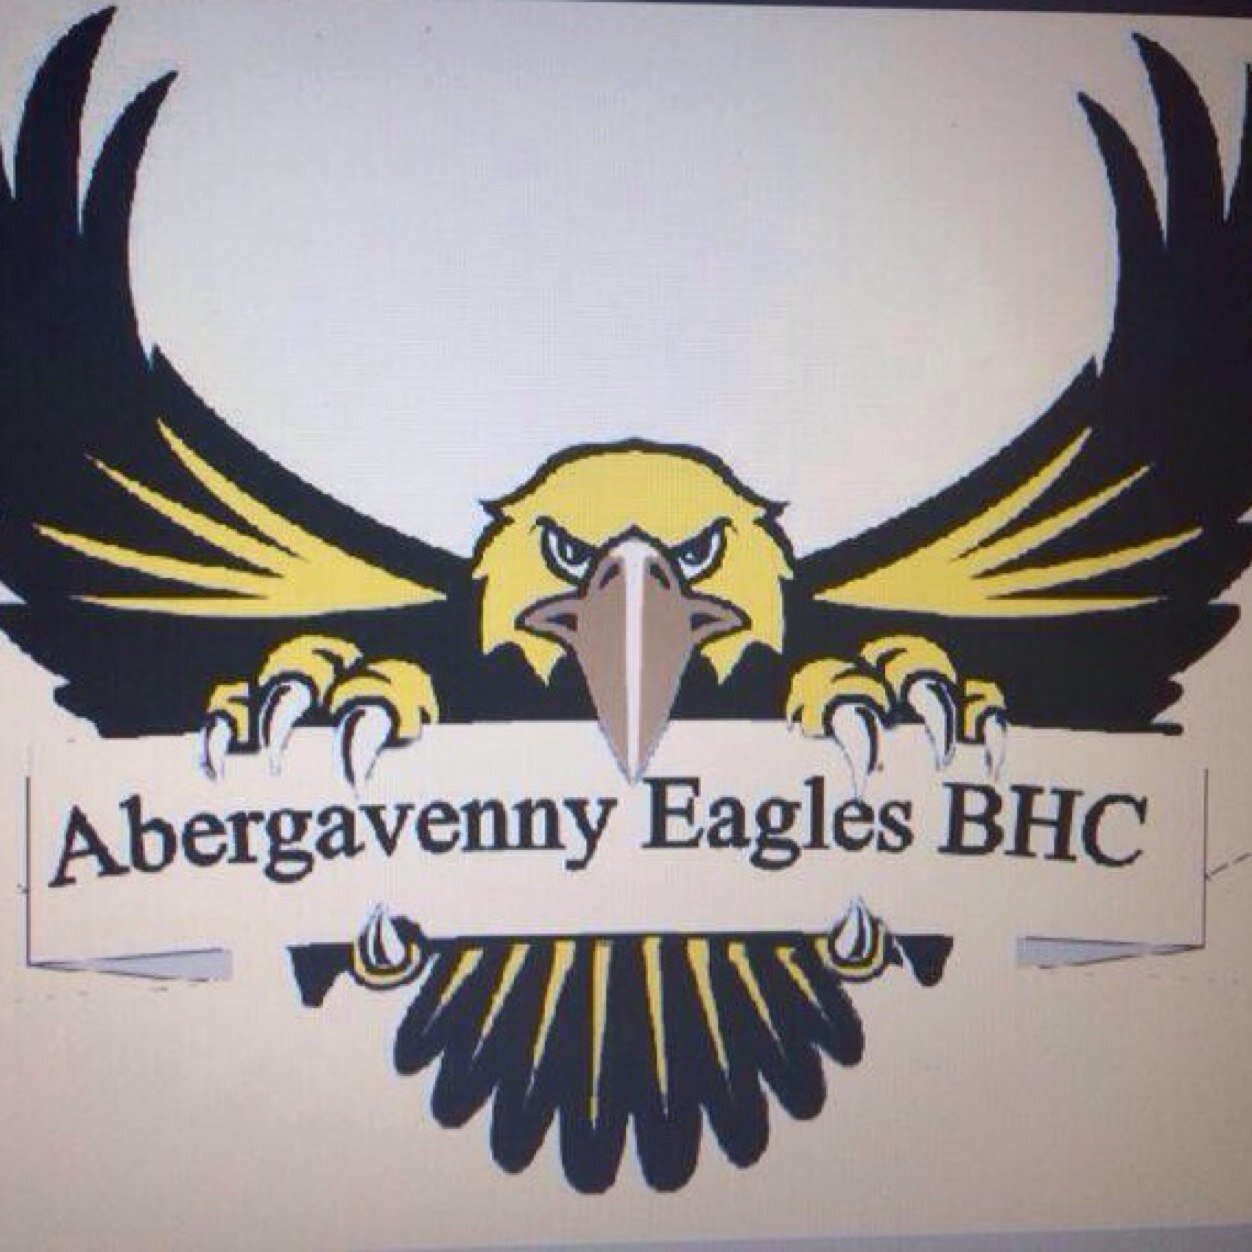 Eagles are a potential ball hockey club based in the South Wales town of Abergavenny. Looking for people to help run  and set up the club - get in touch!